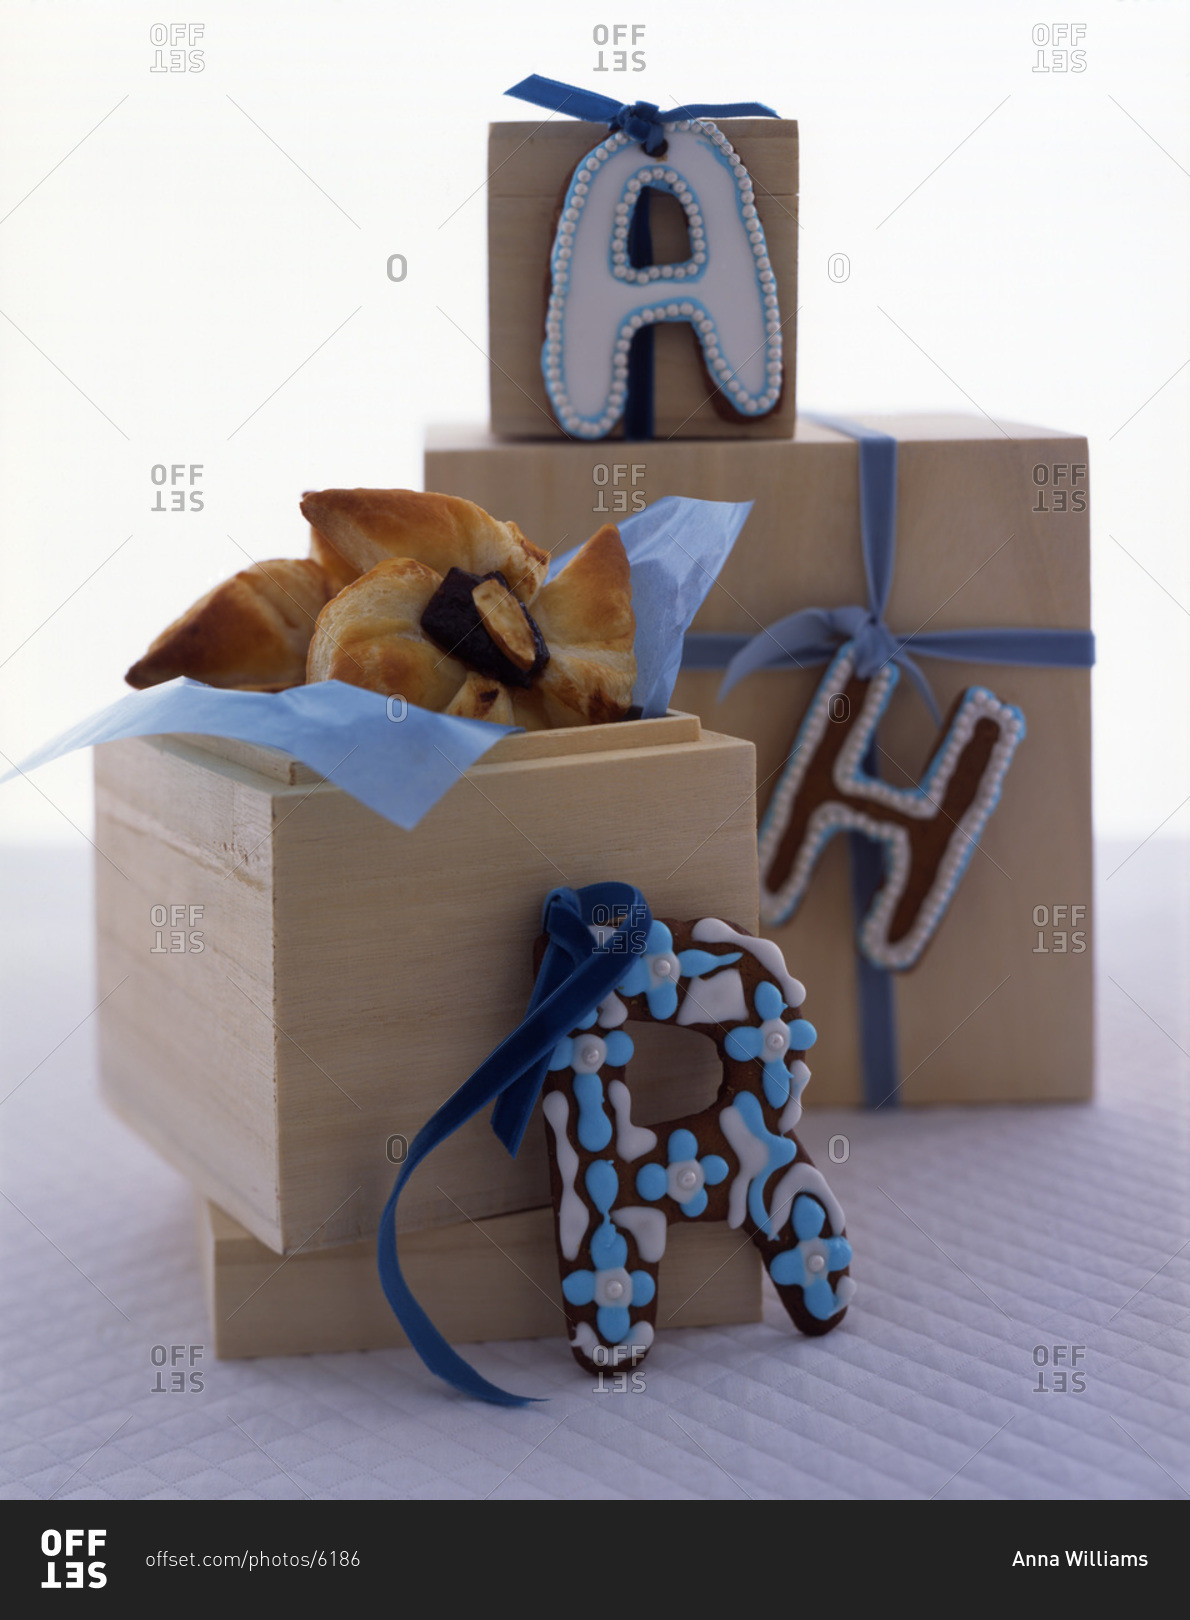 Edible gifts in wooden boxes.